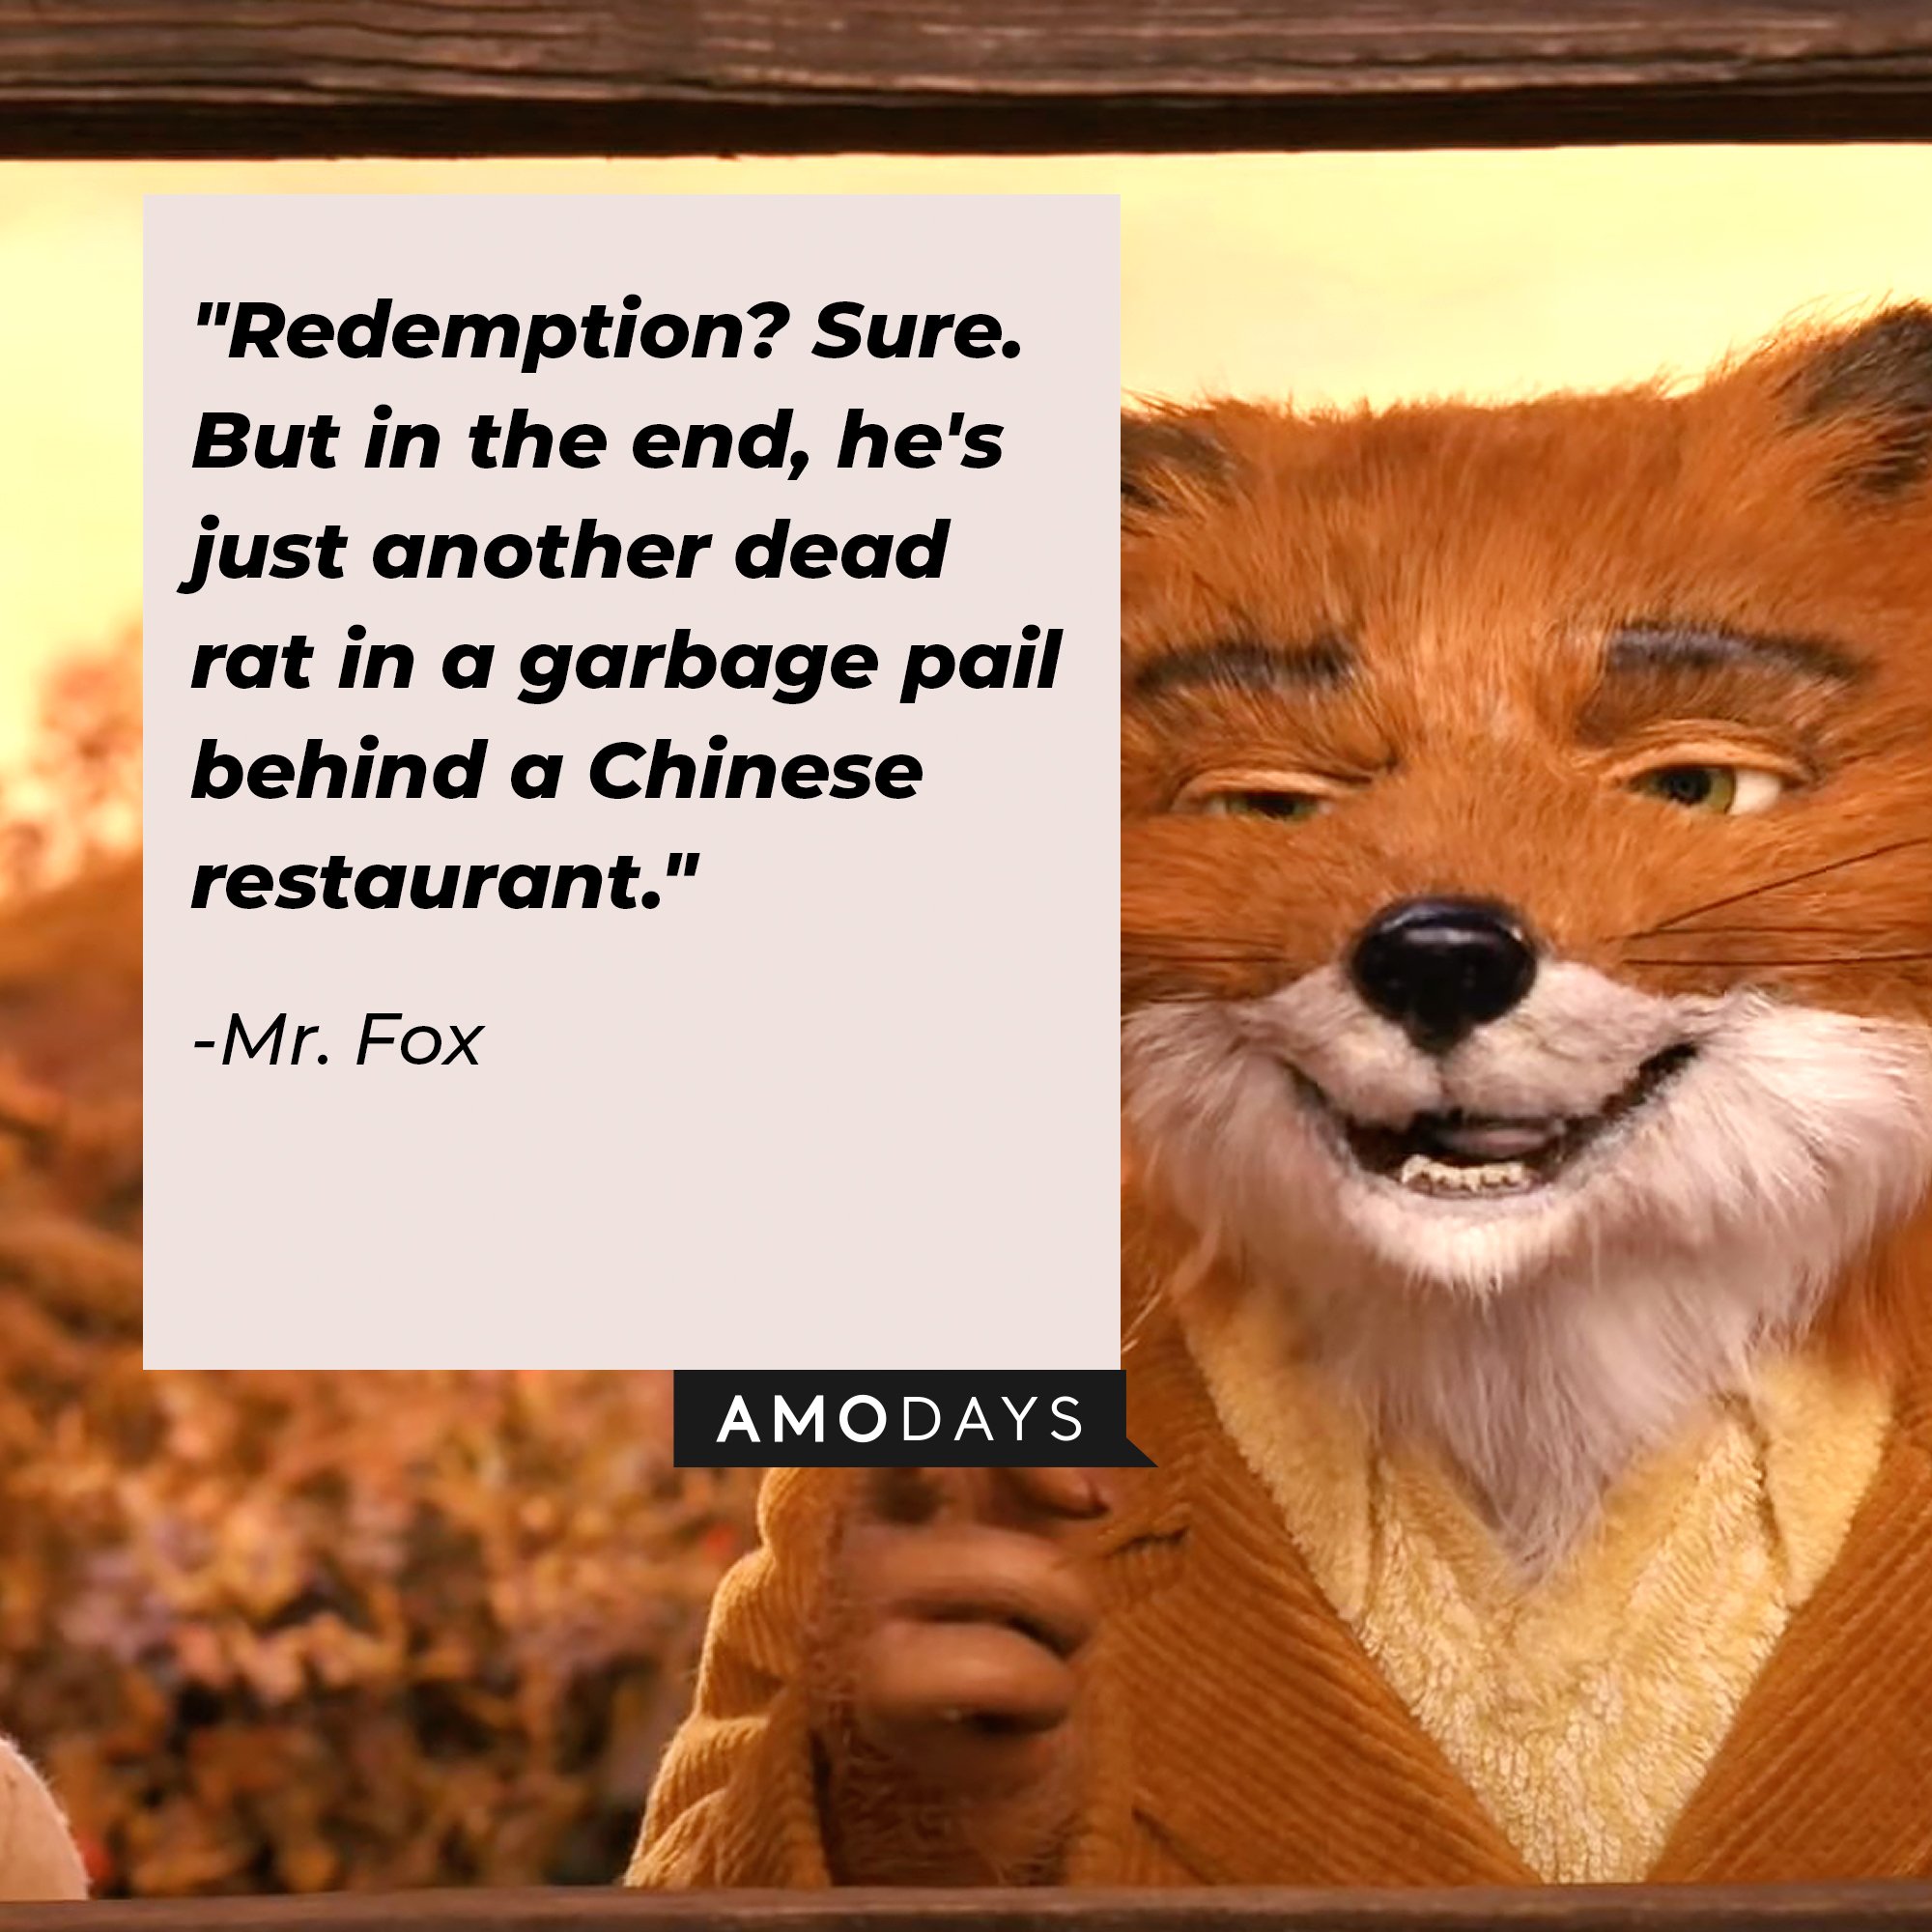  Mr. Fox's Quote: "Redemption? Sure. But in the end, he's just another dead rat in a garbage pail behind a Chinese restaurant." | Image: AmoDays